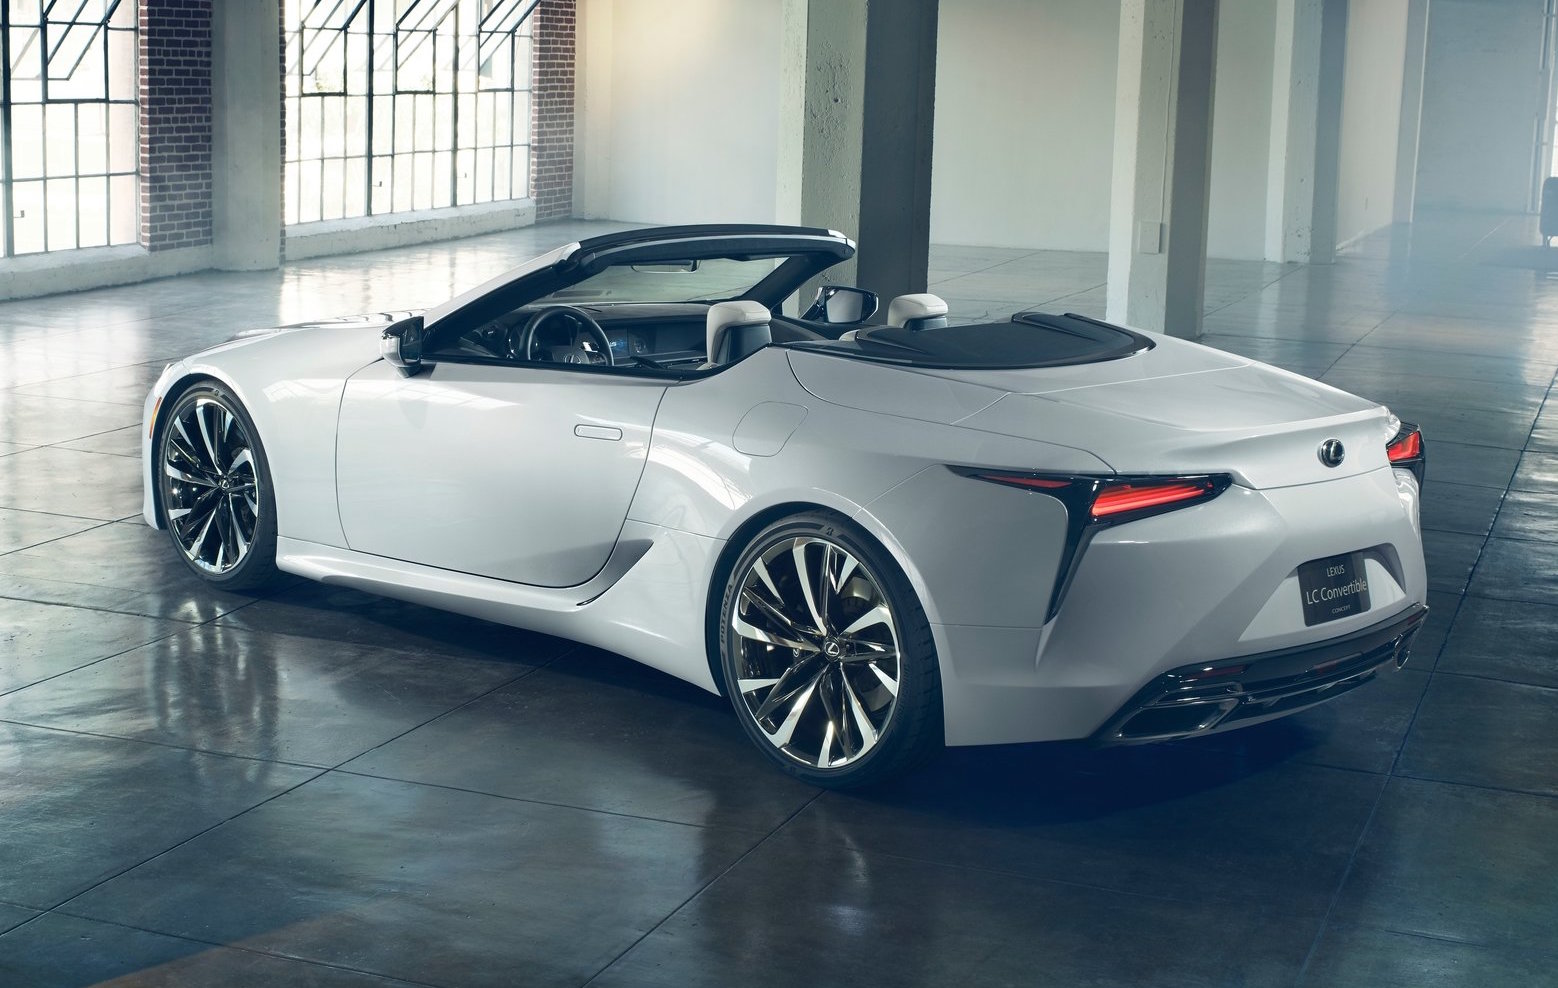 Lexus LC convertible to debut at Goodwood Festival of Speed – report